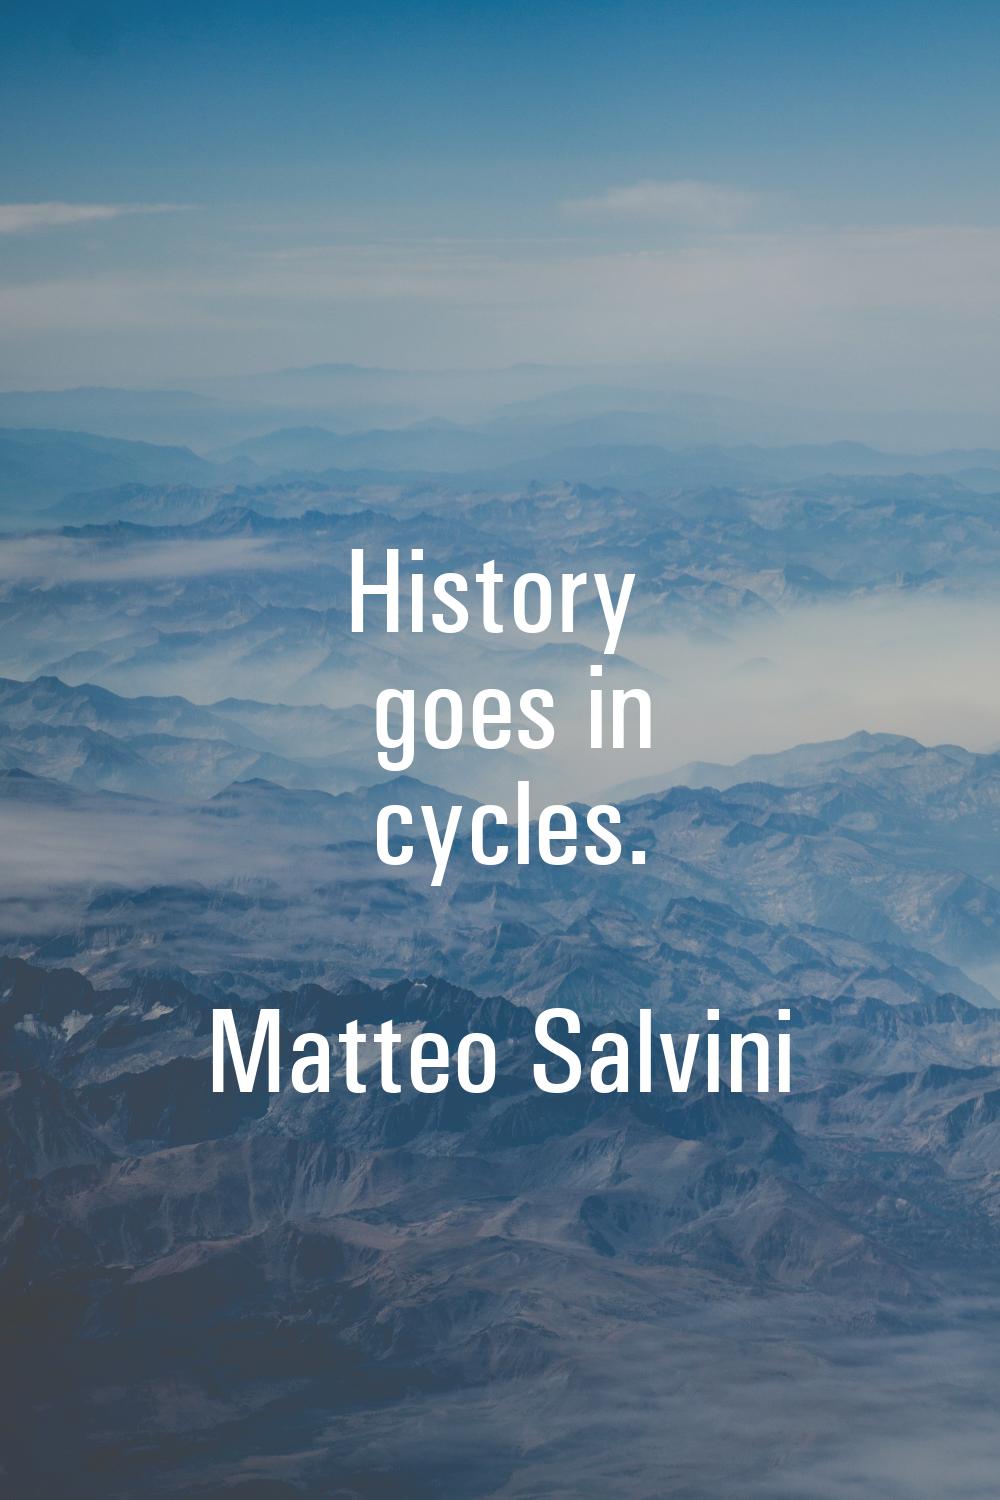 History goes in cycles.